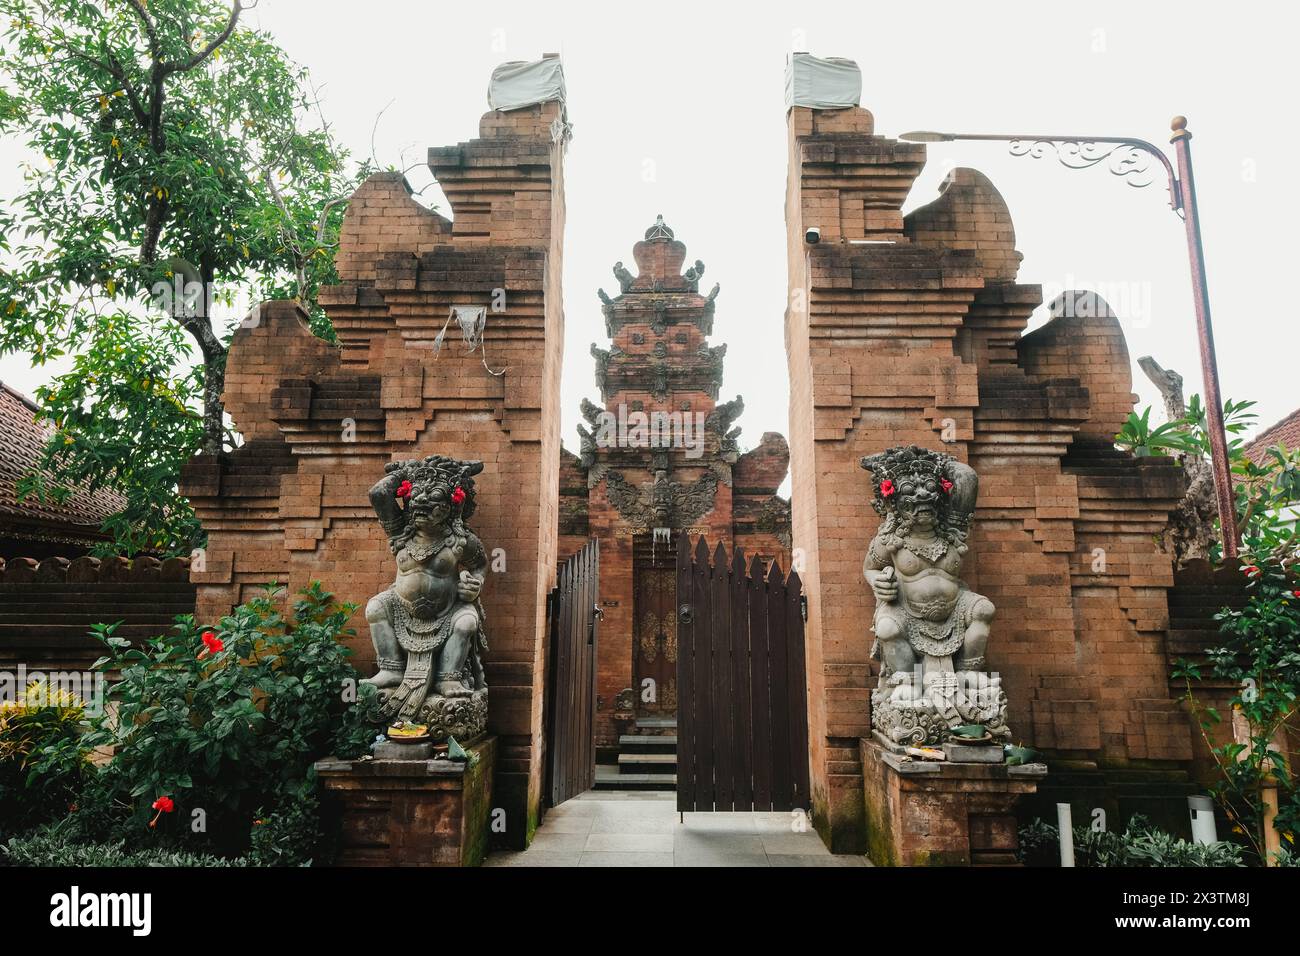 Balinese temple known as 'Pura' entrance gate usually known as 'Candi Bentar' with two guardian statues flanking the sides called Dwarapala Stock Photo